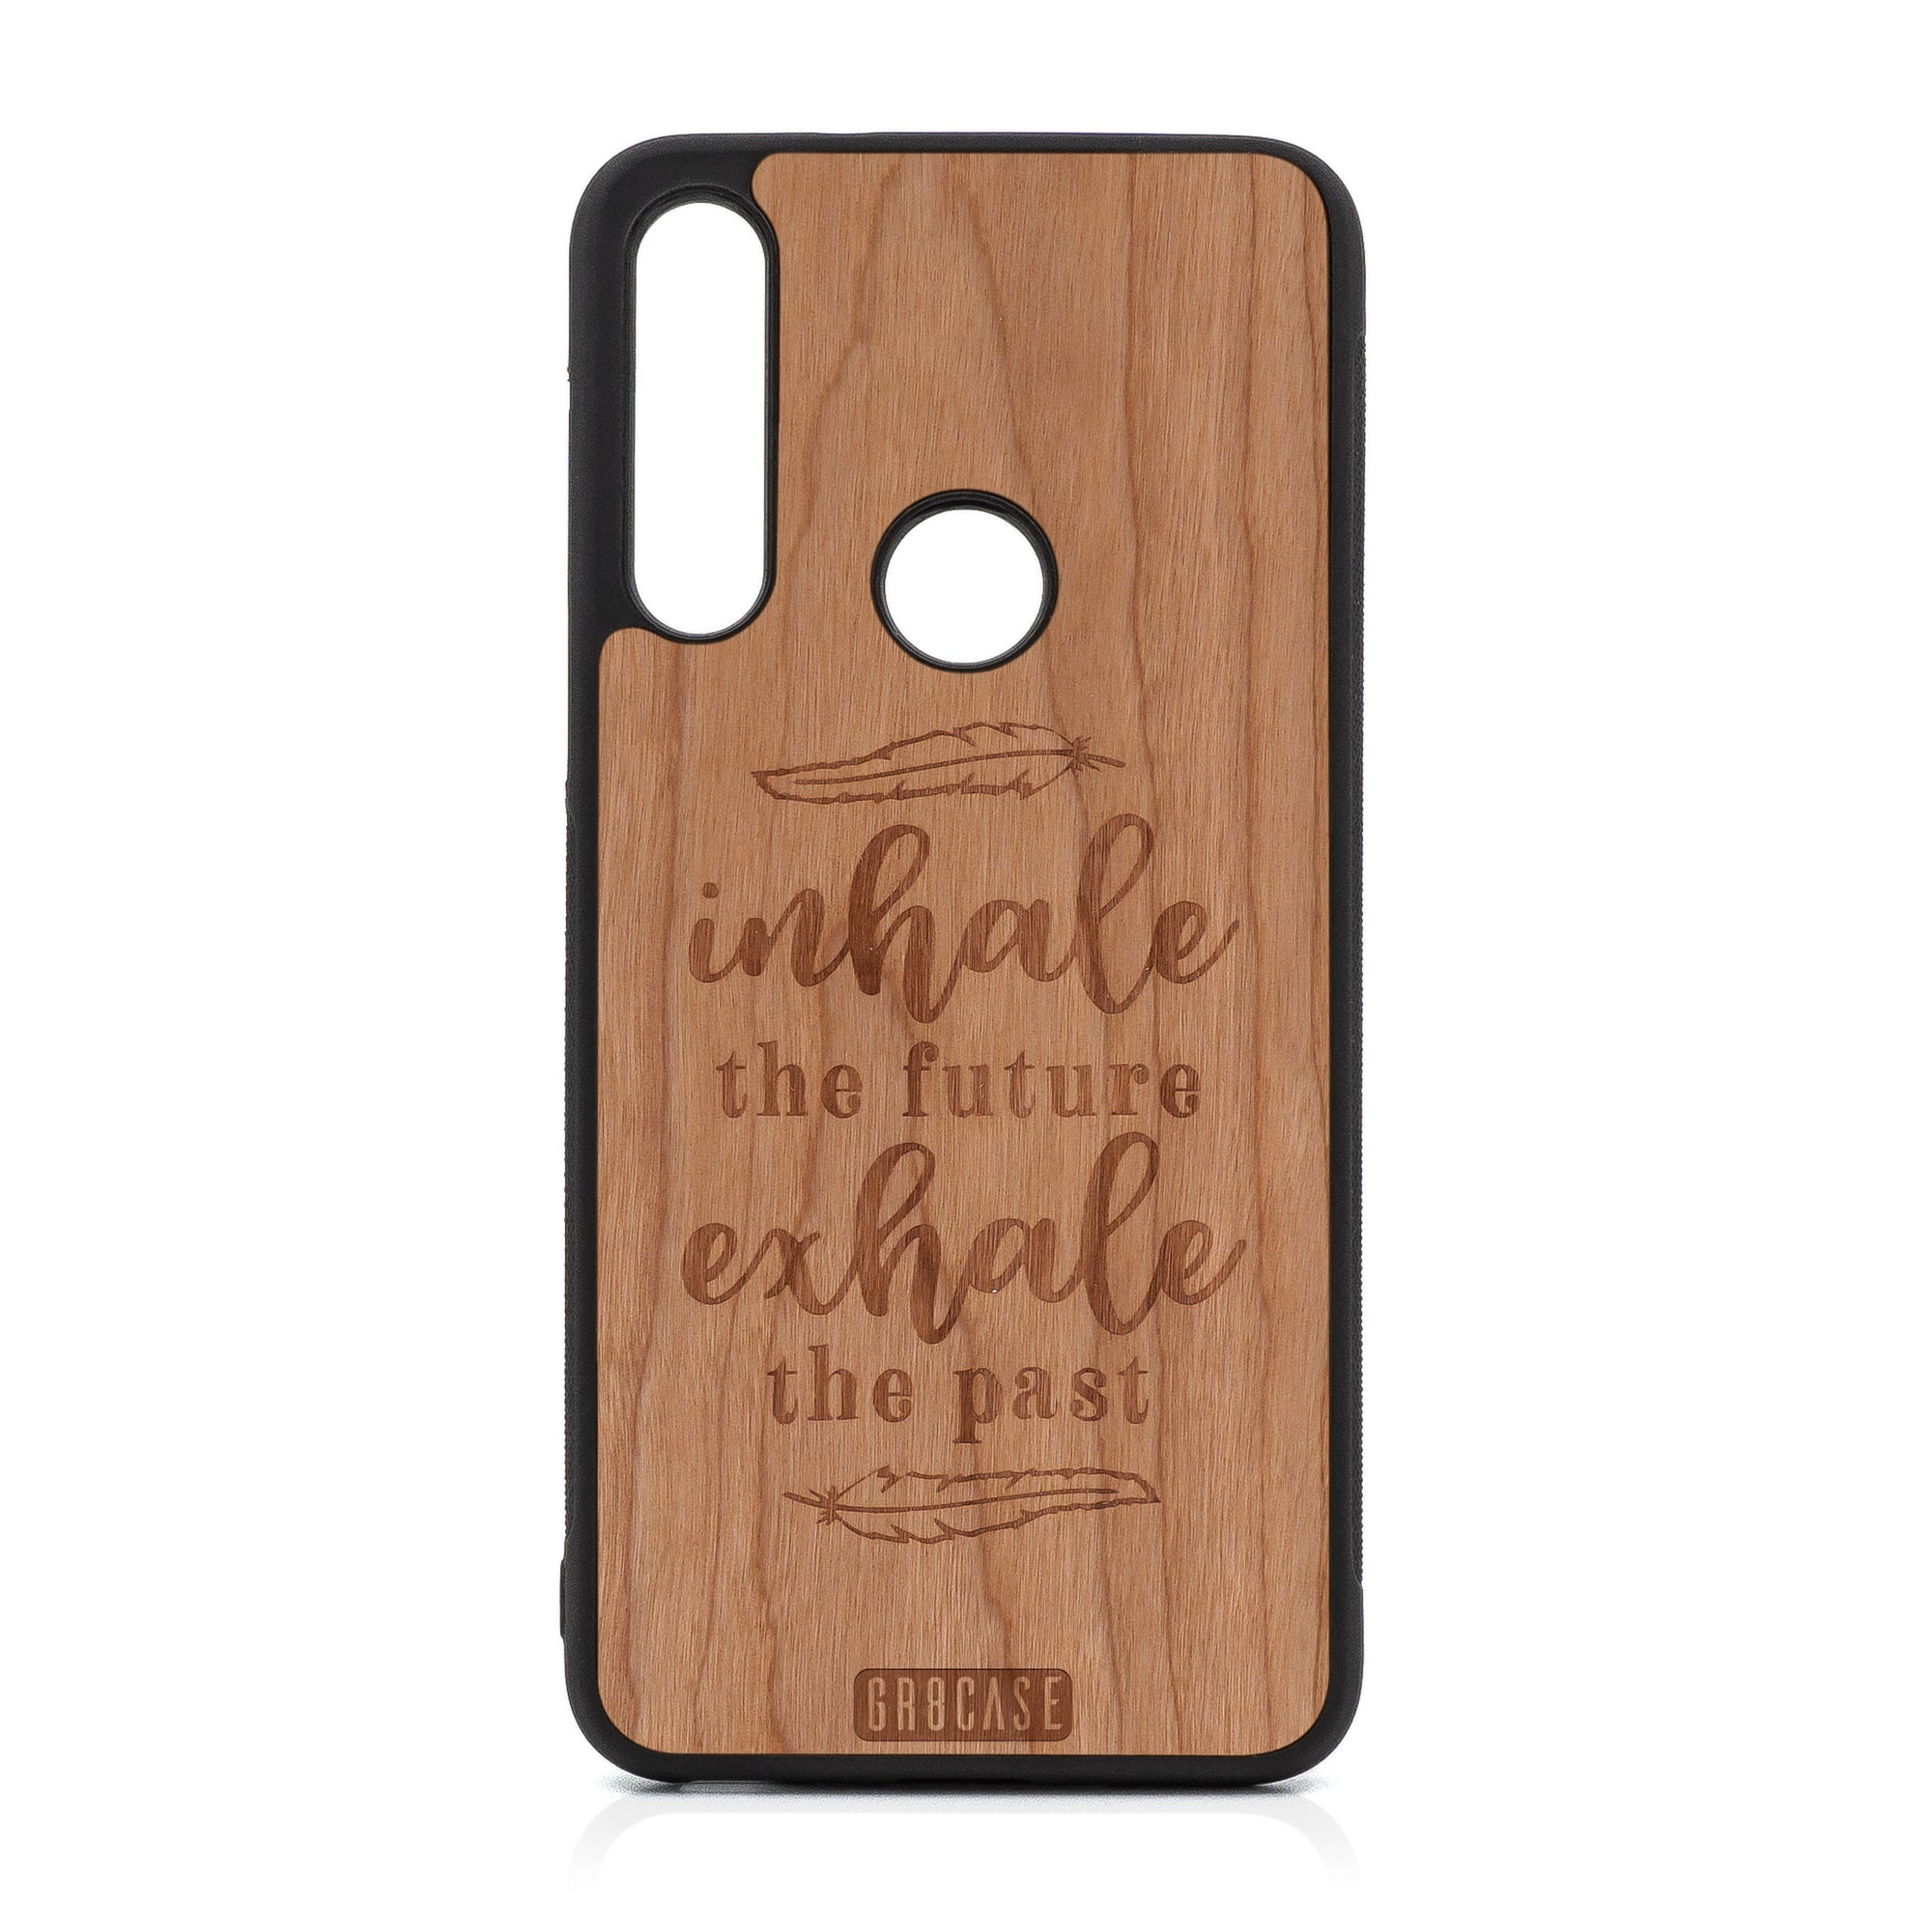 Inhale The Future Exhale The Past Design Wood Case For Moto G Fast